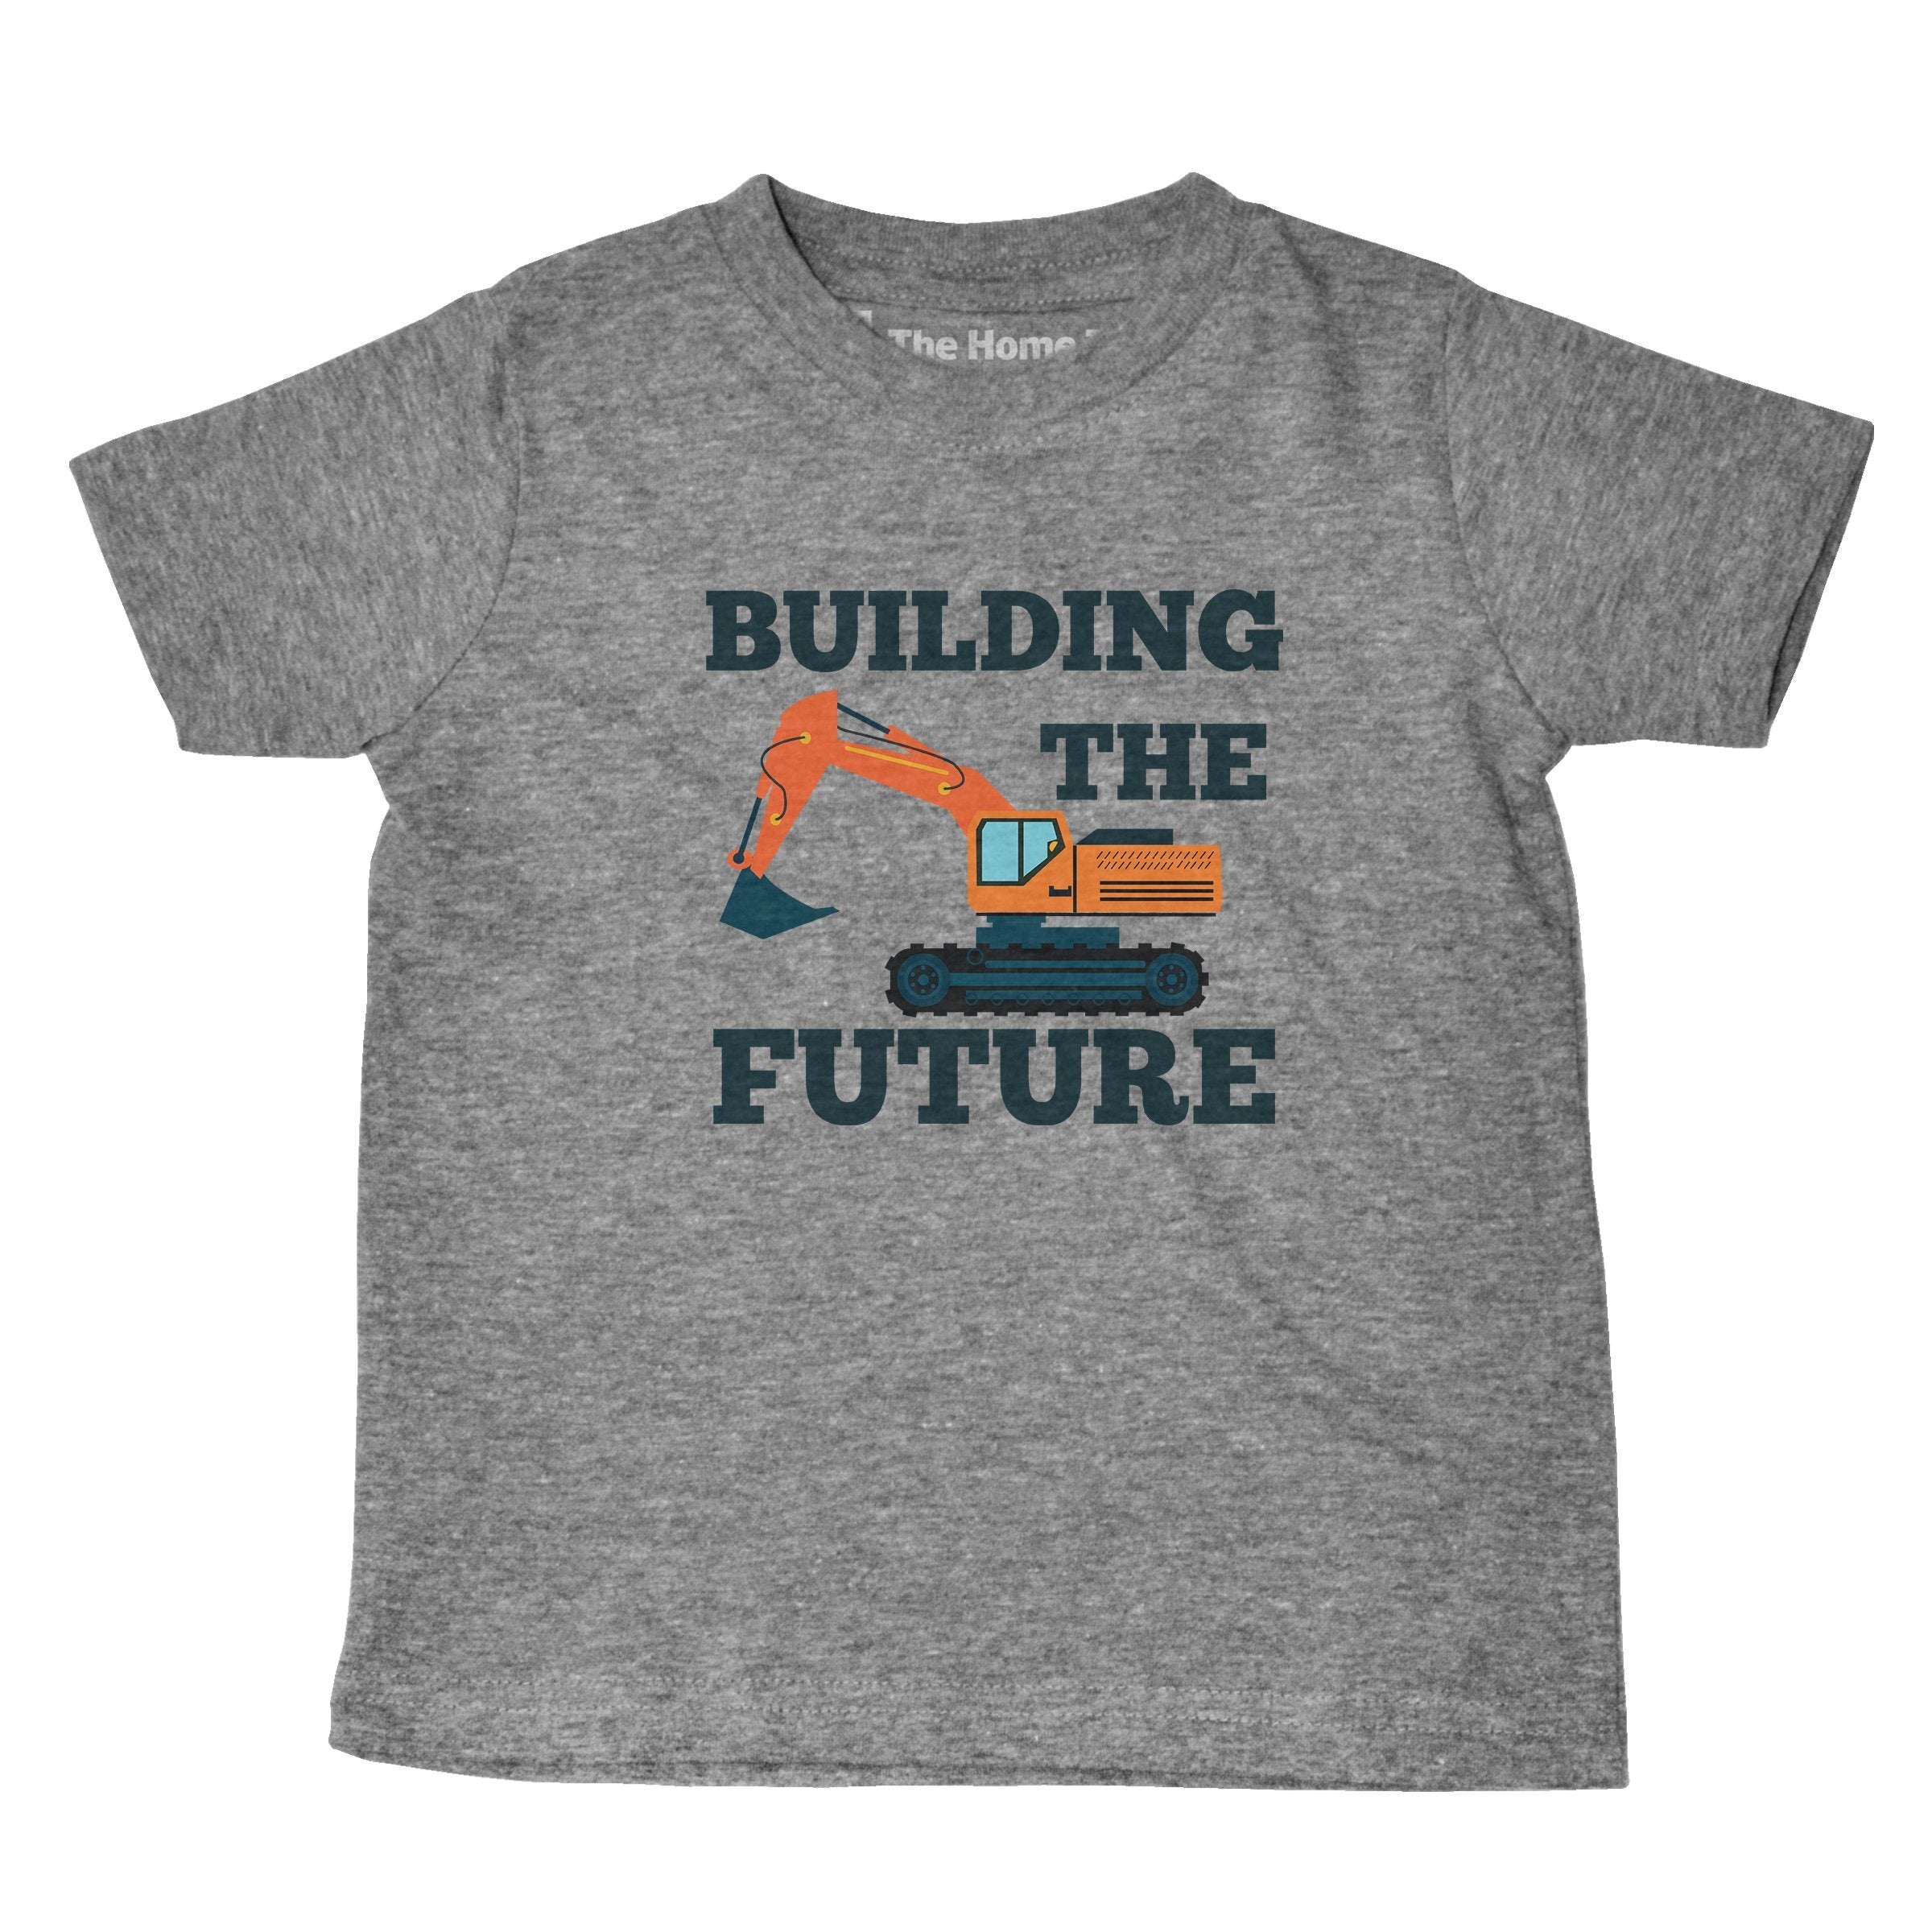 Building The Future Kids